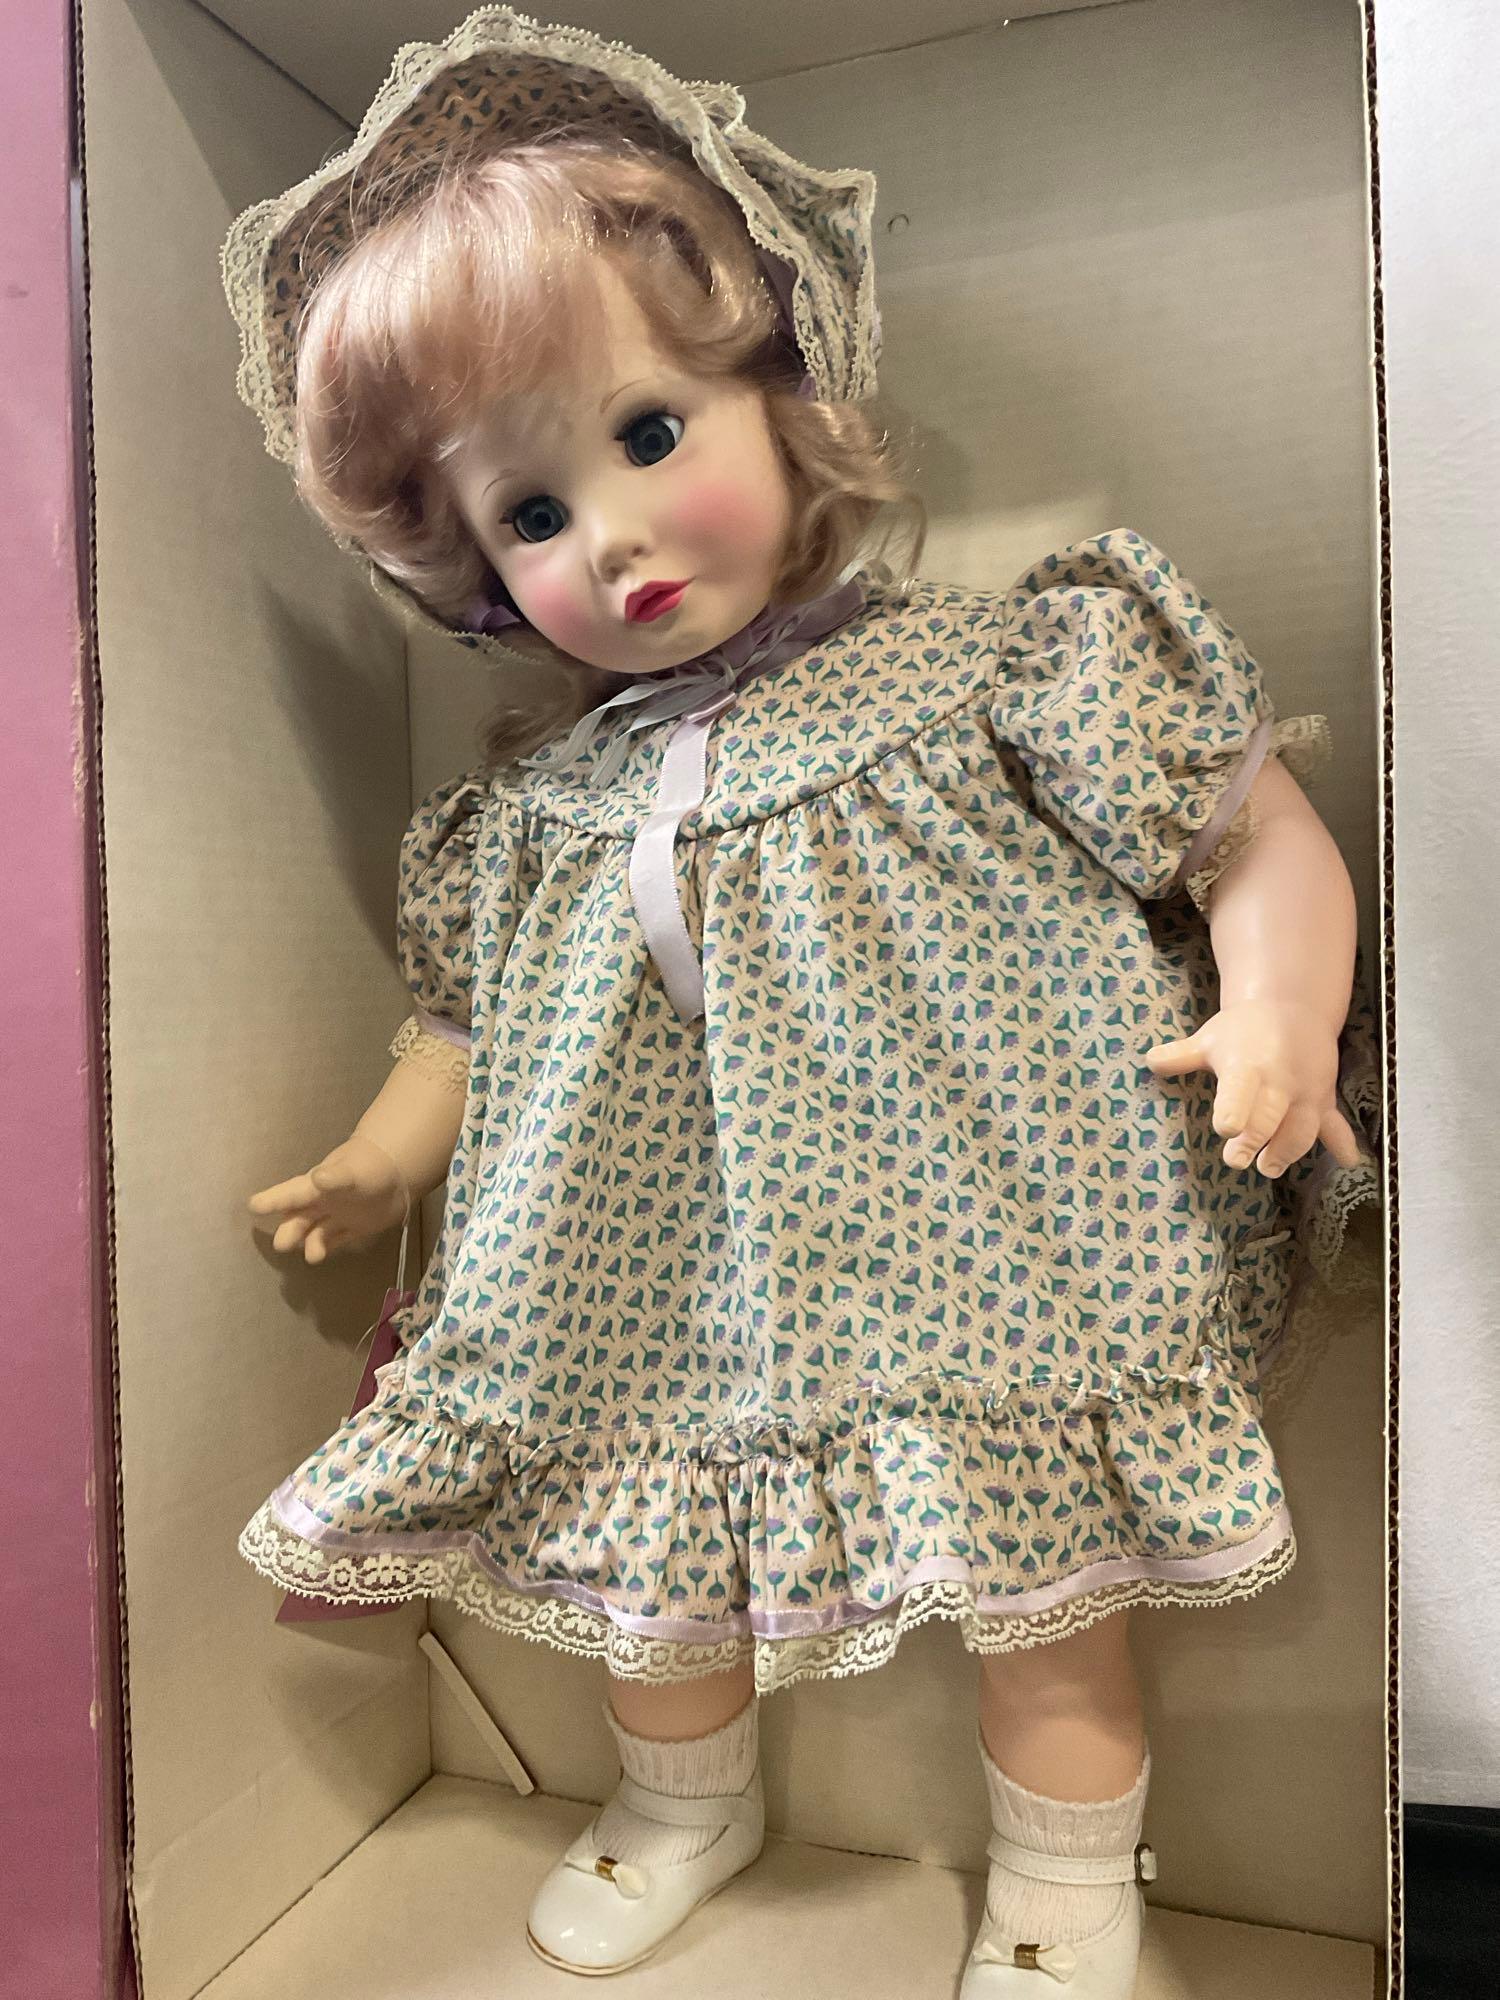 Suzanne Gibson Doll from Reeves Intl. #24844 Lynn